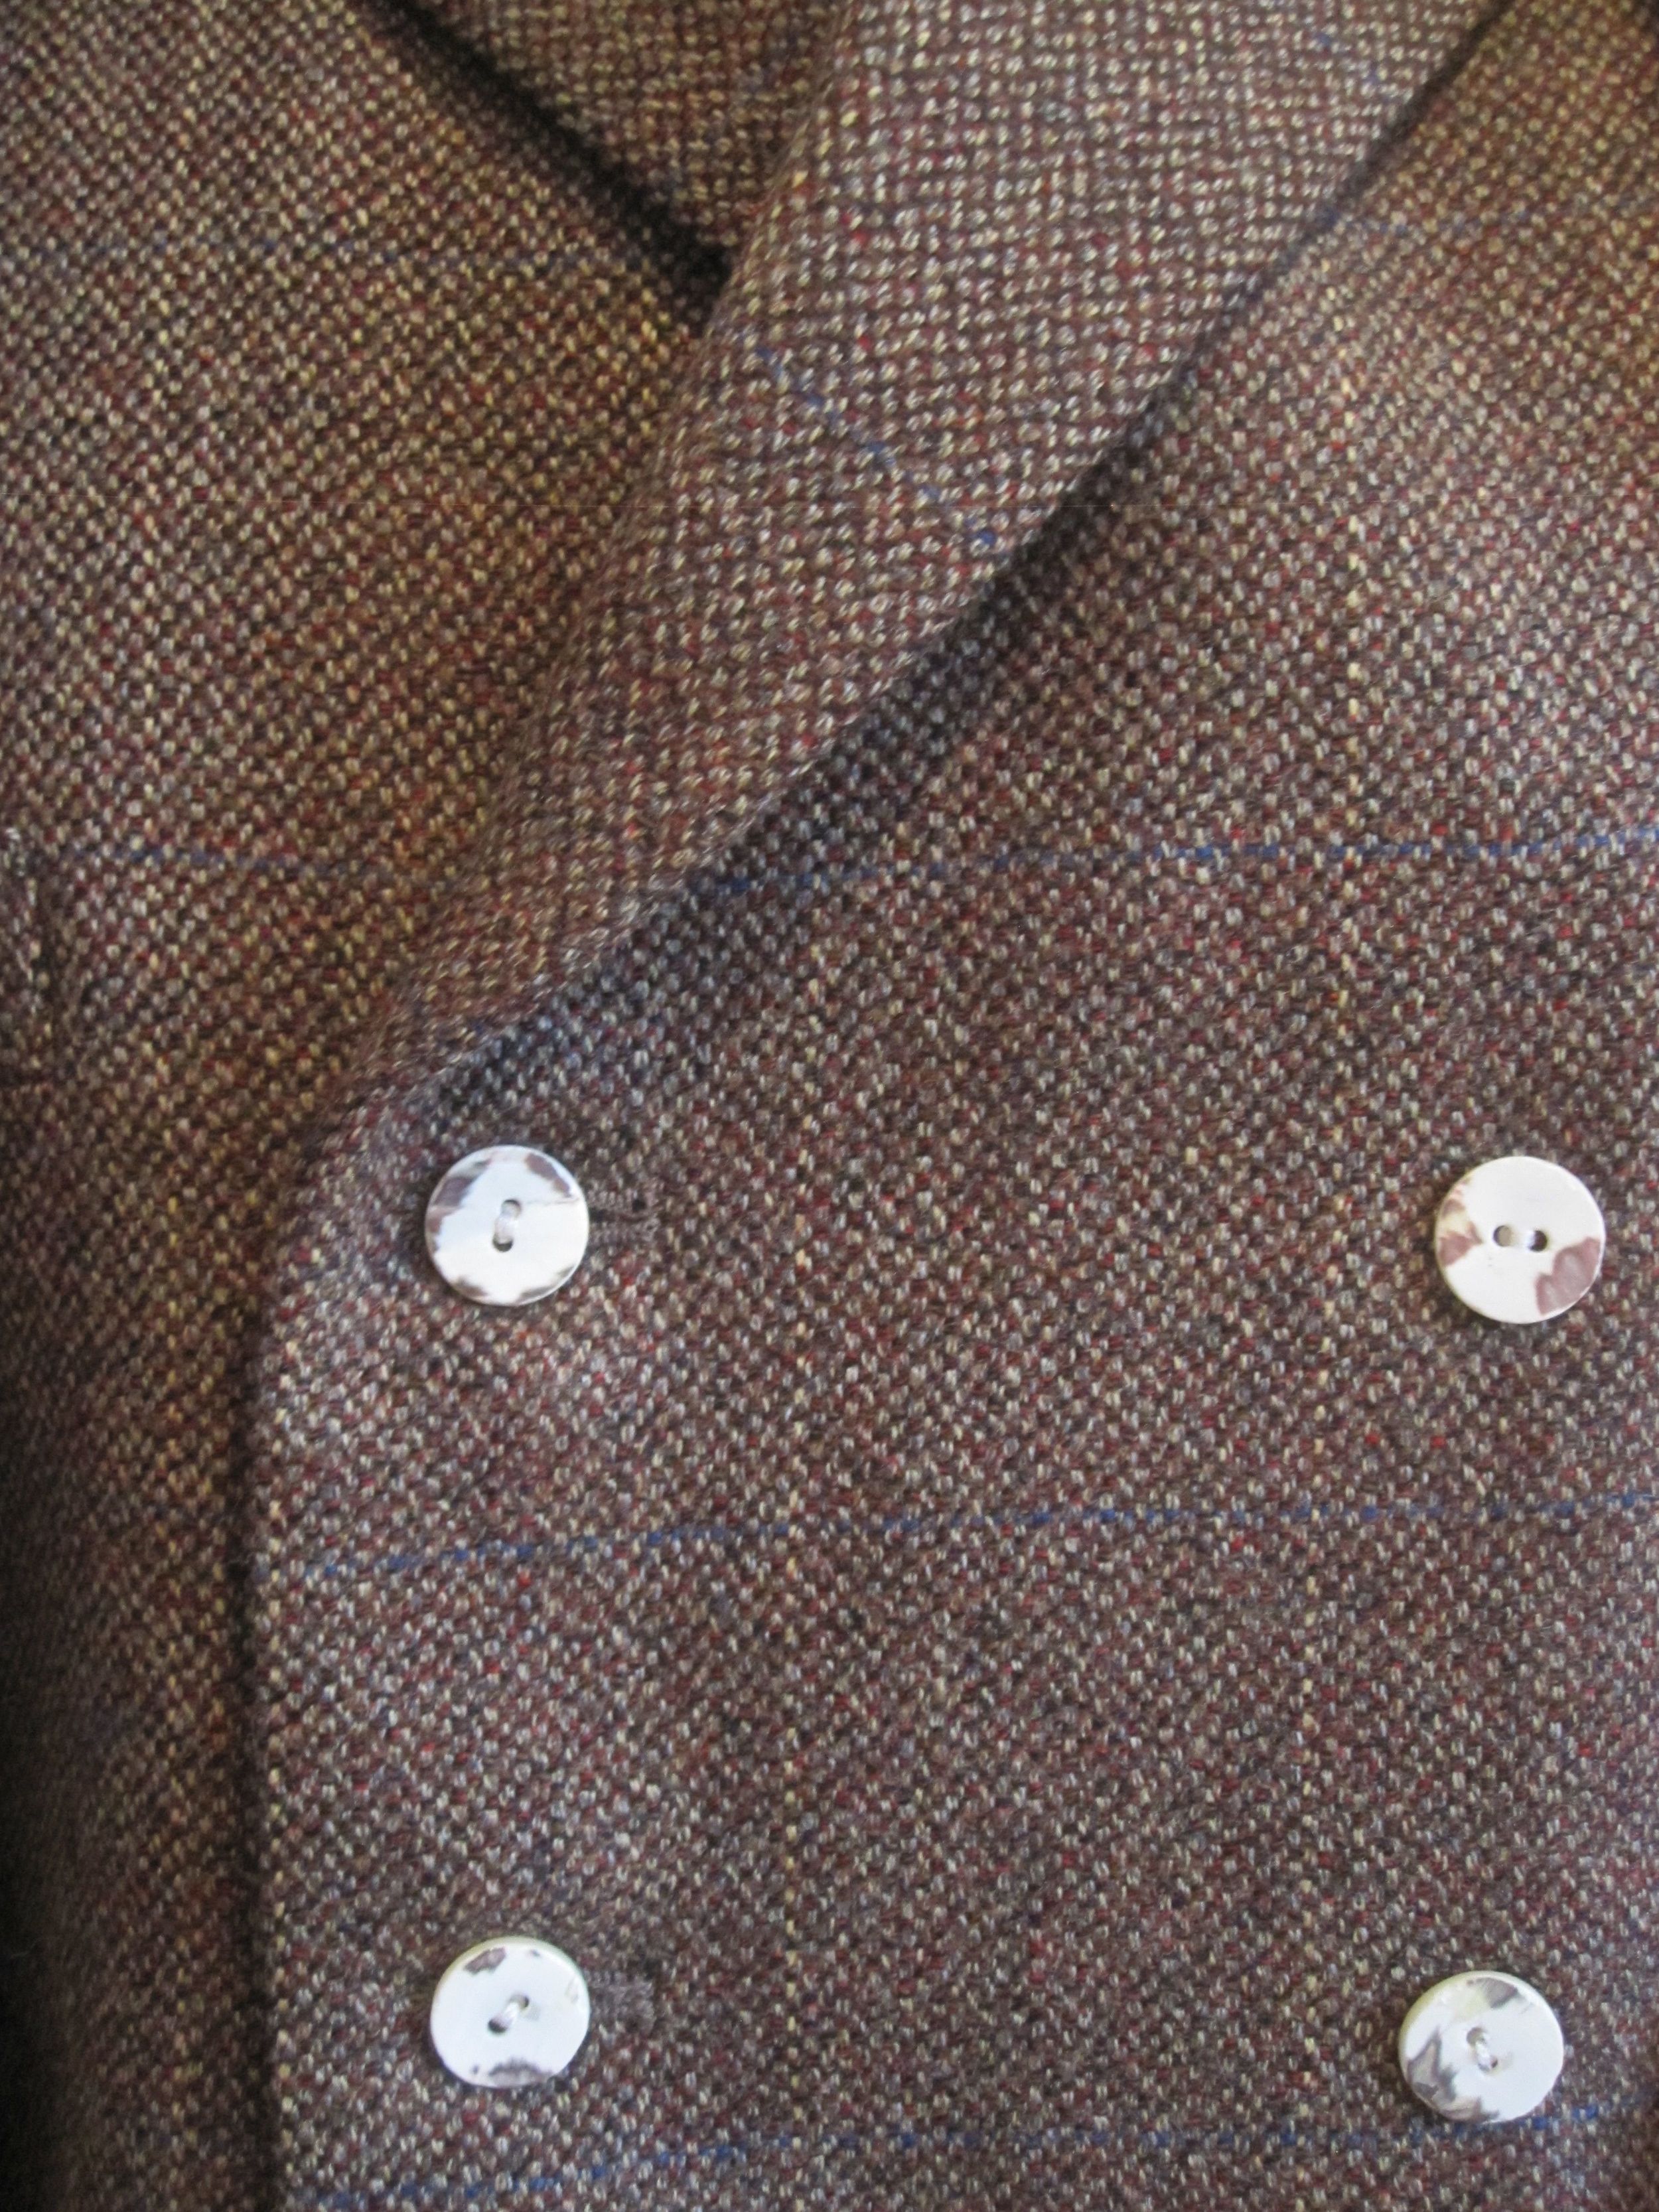 Poacher's double breasted Waistcoat button detail.jpg